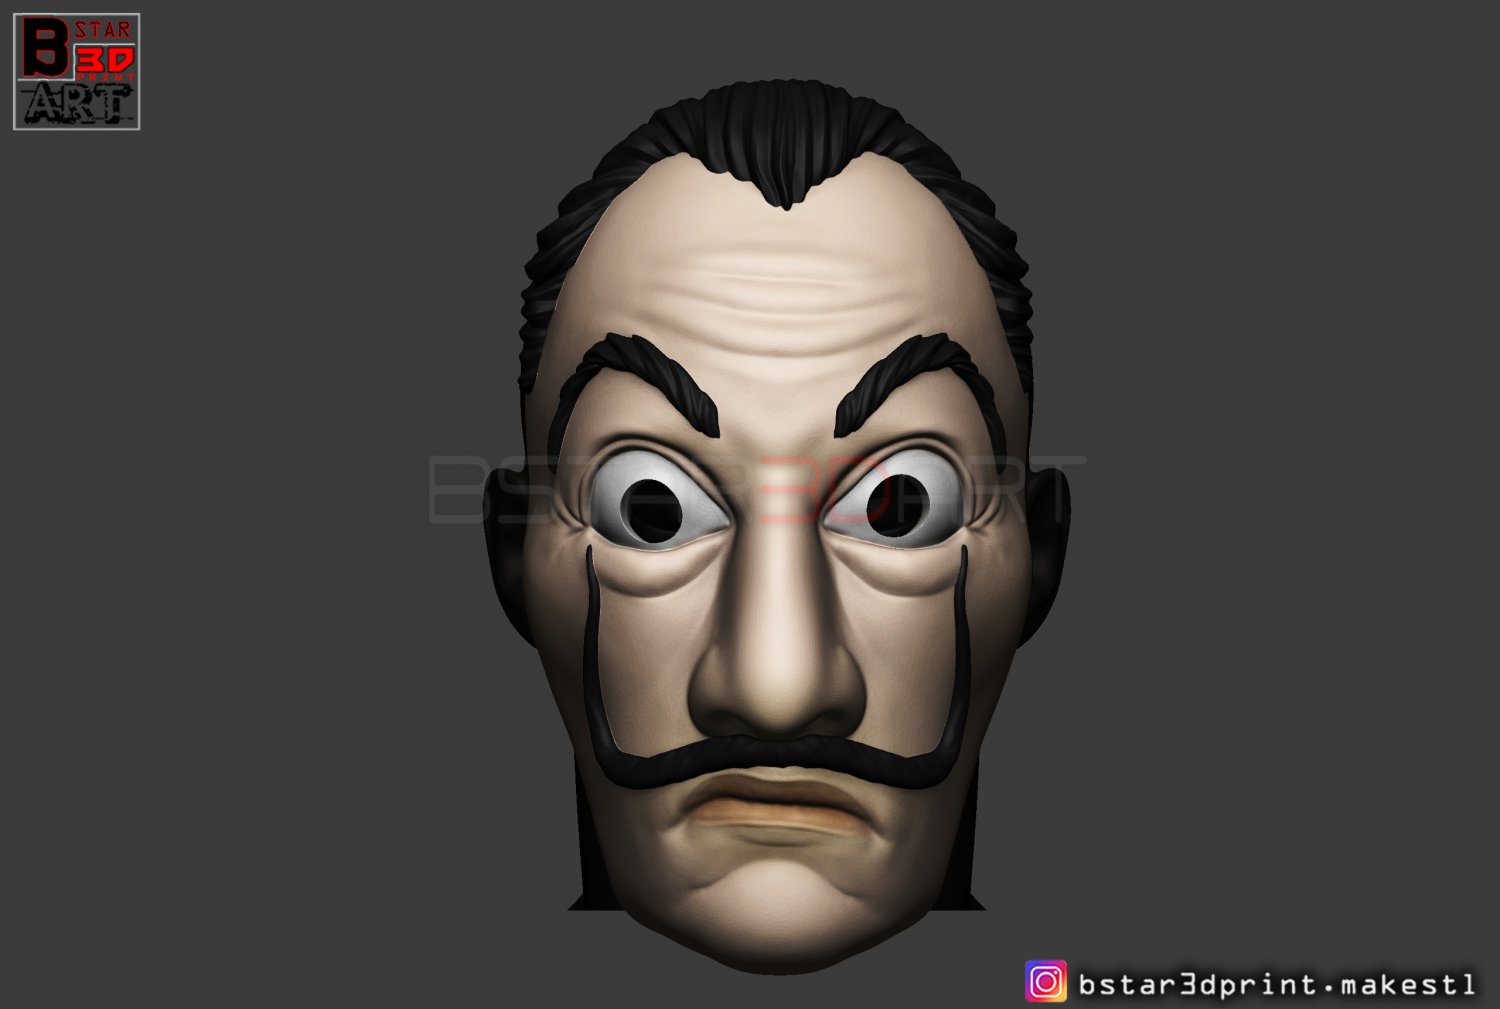 Money Heist Mask Images - Robber Mask Stock Images, Royalty-Free Images & Vectors ... - Please contact us if you want to publish a money heist mask.